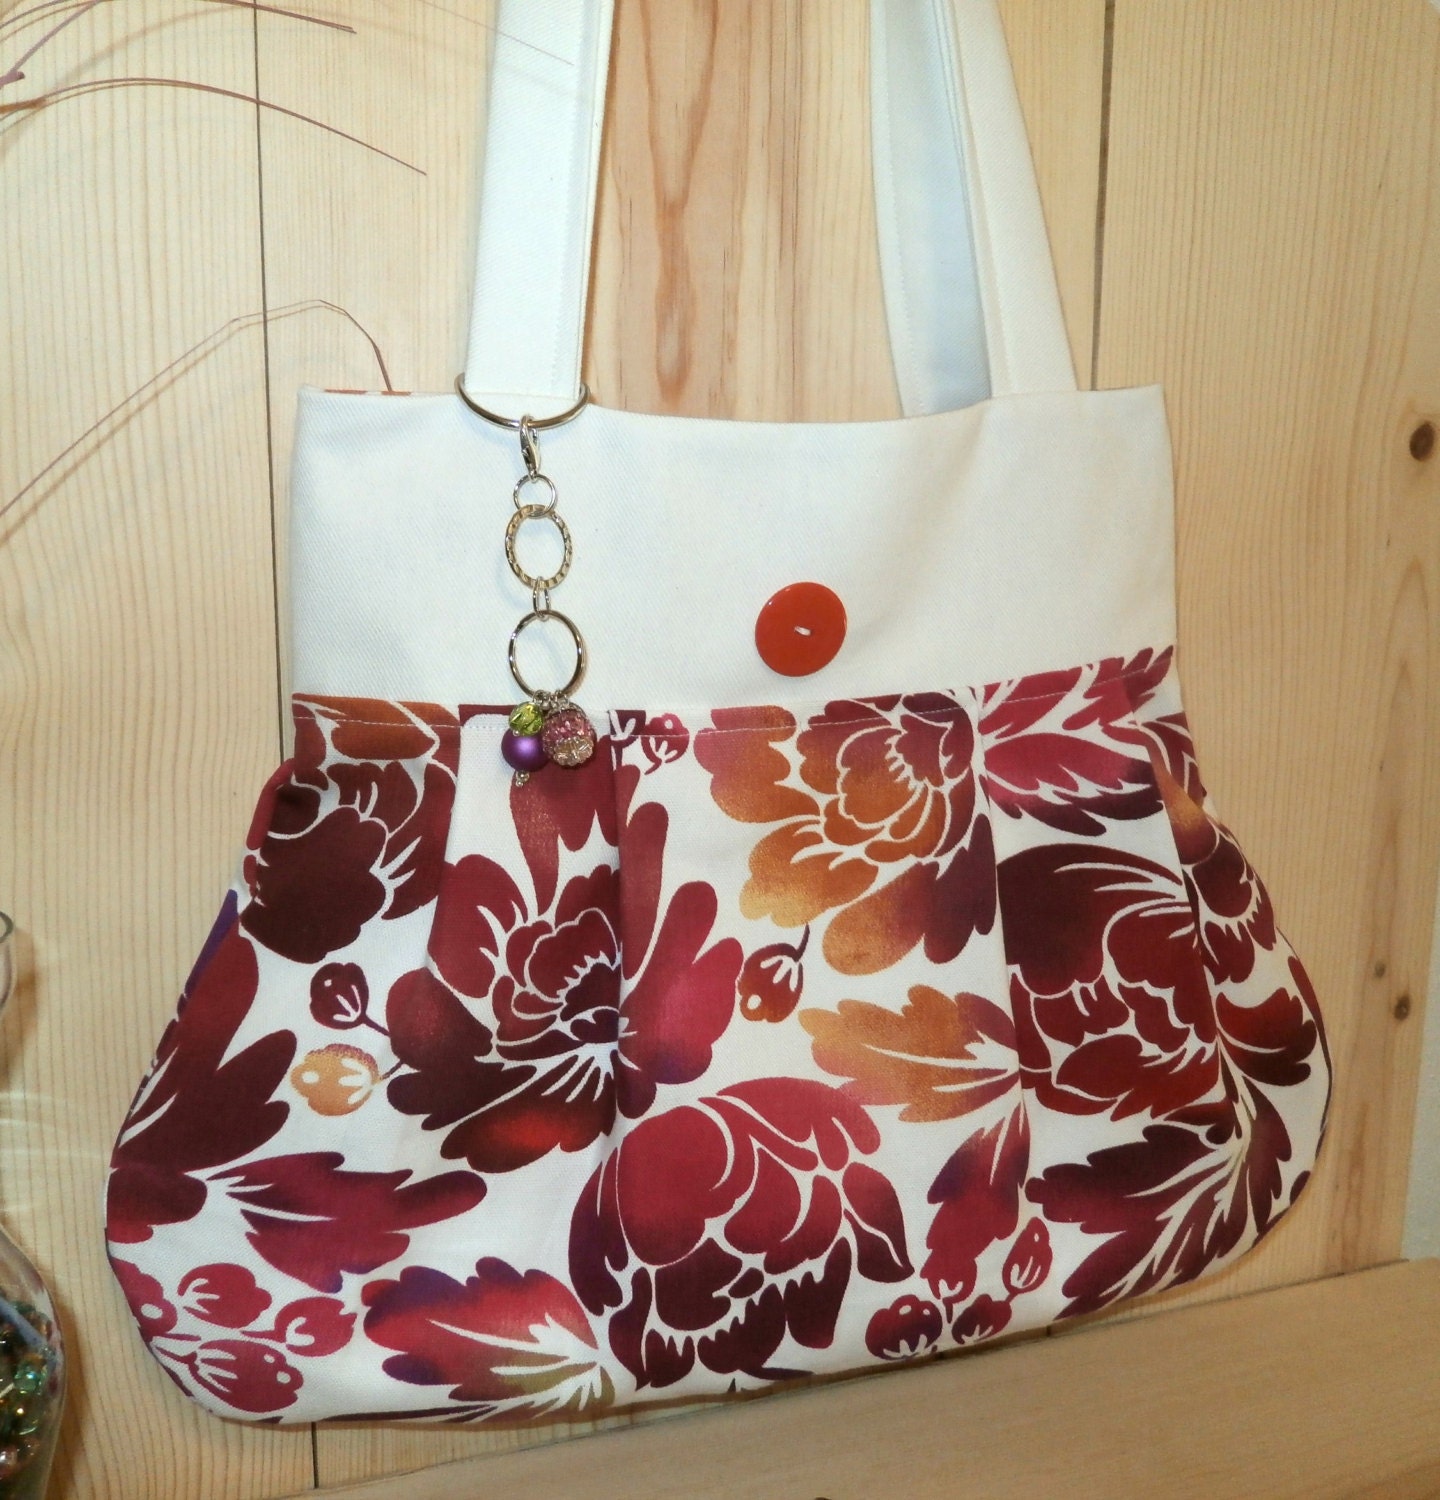 Floral Purse with Key Chain Bag Charm and Phone by Studio3B